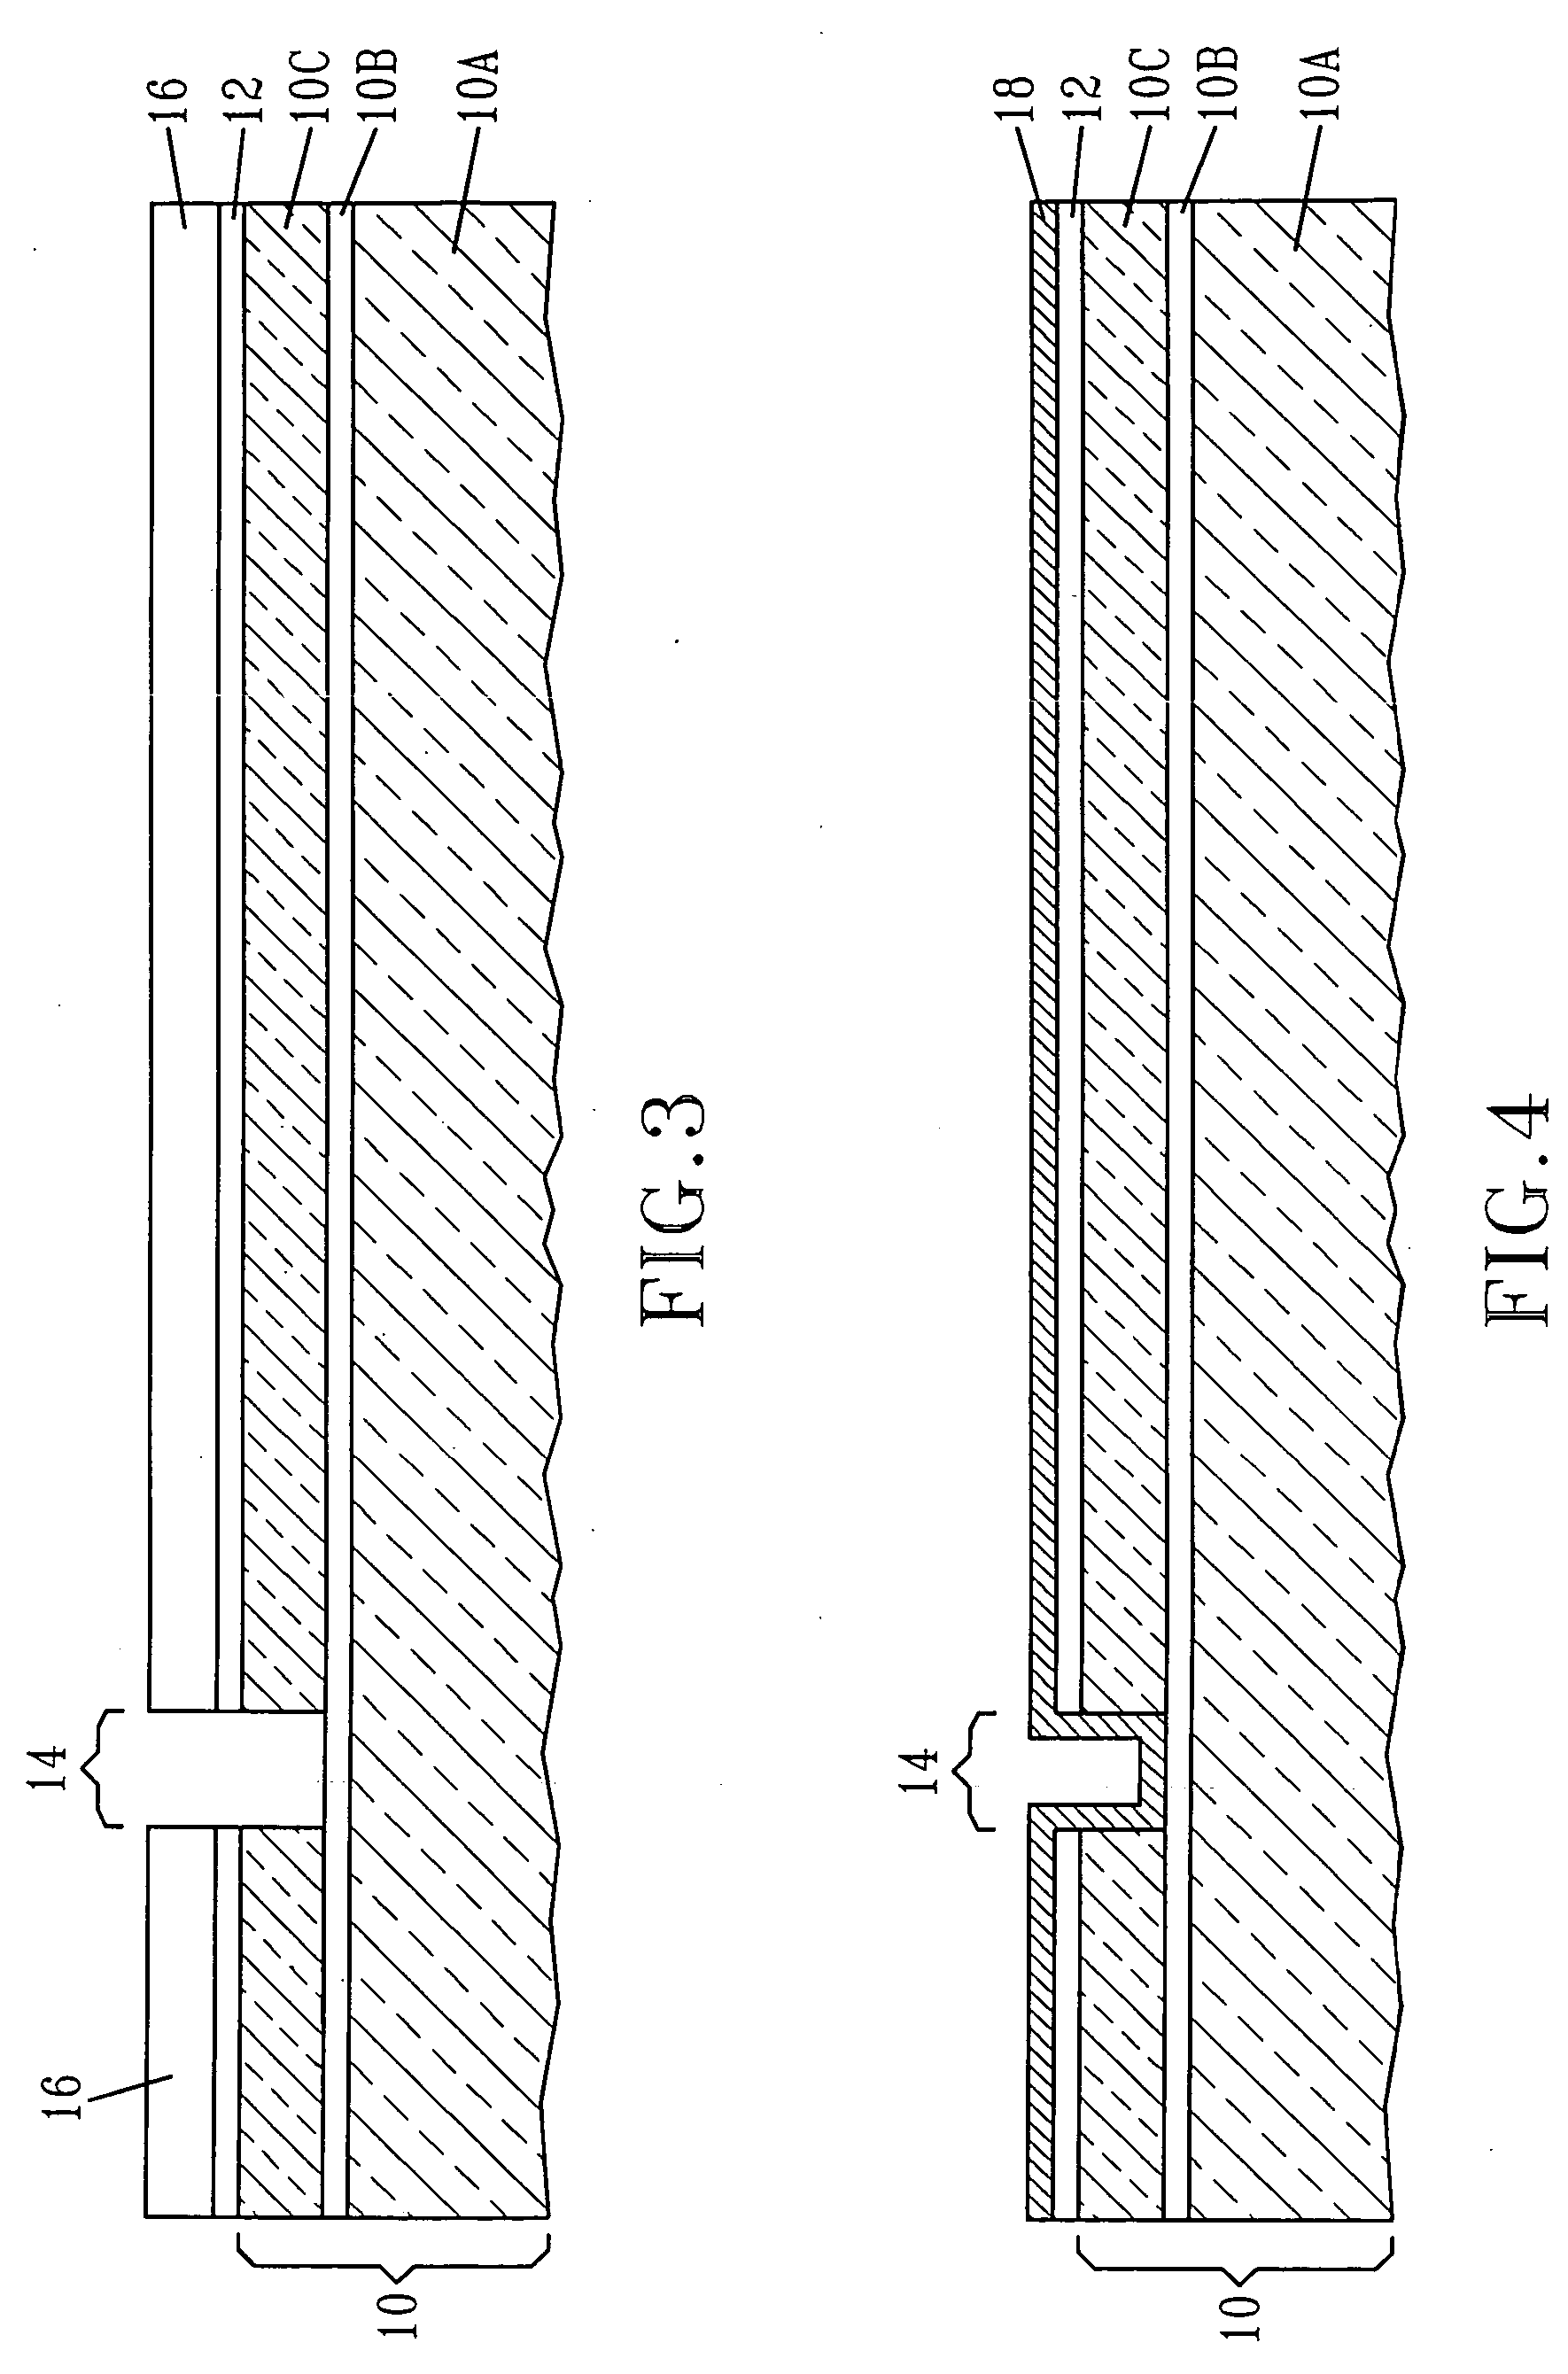 CMOS compatible shallow-trench efuse structure and method